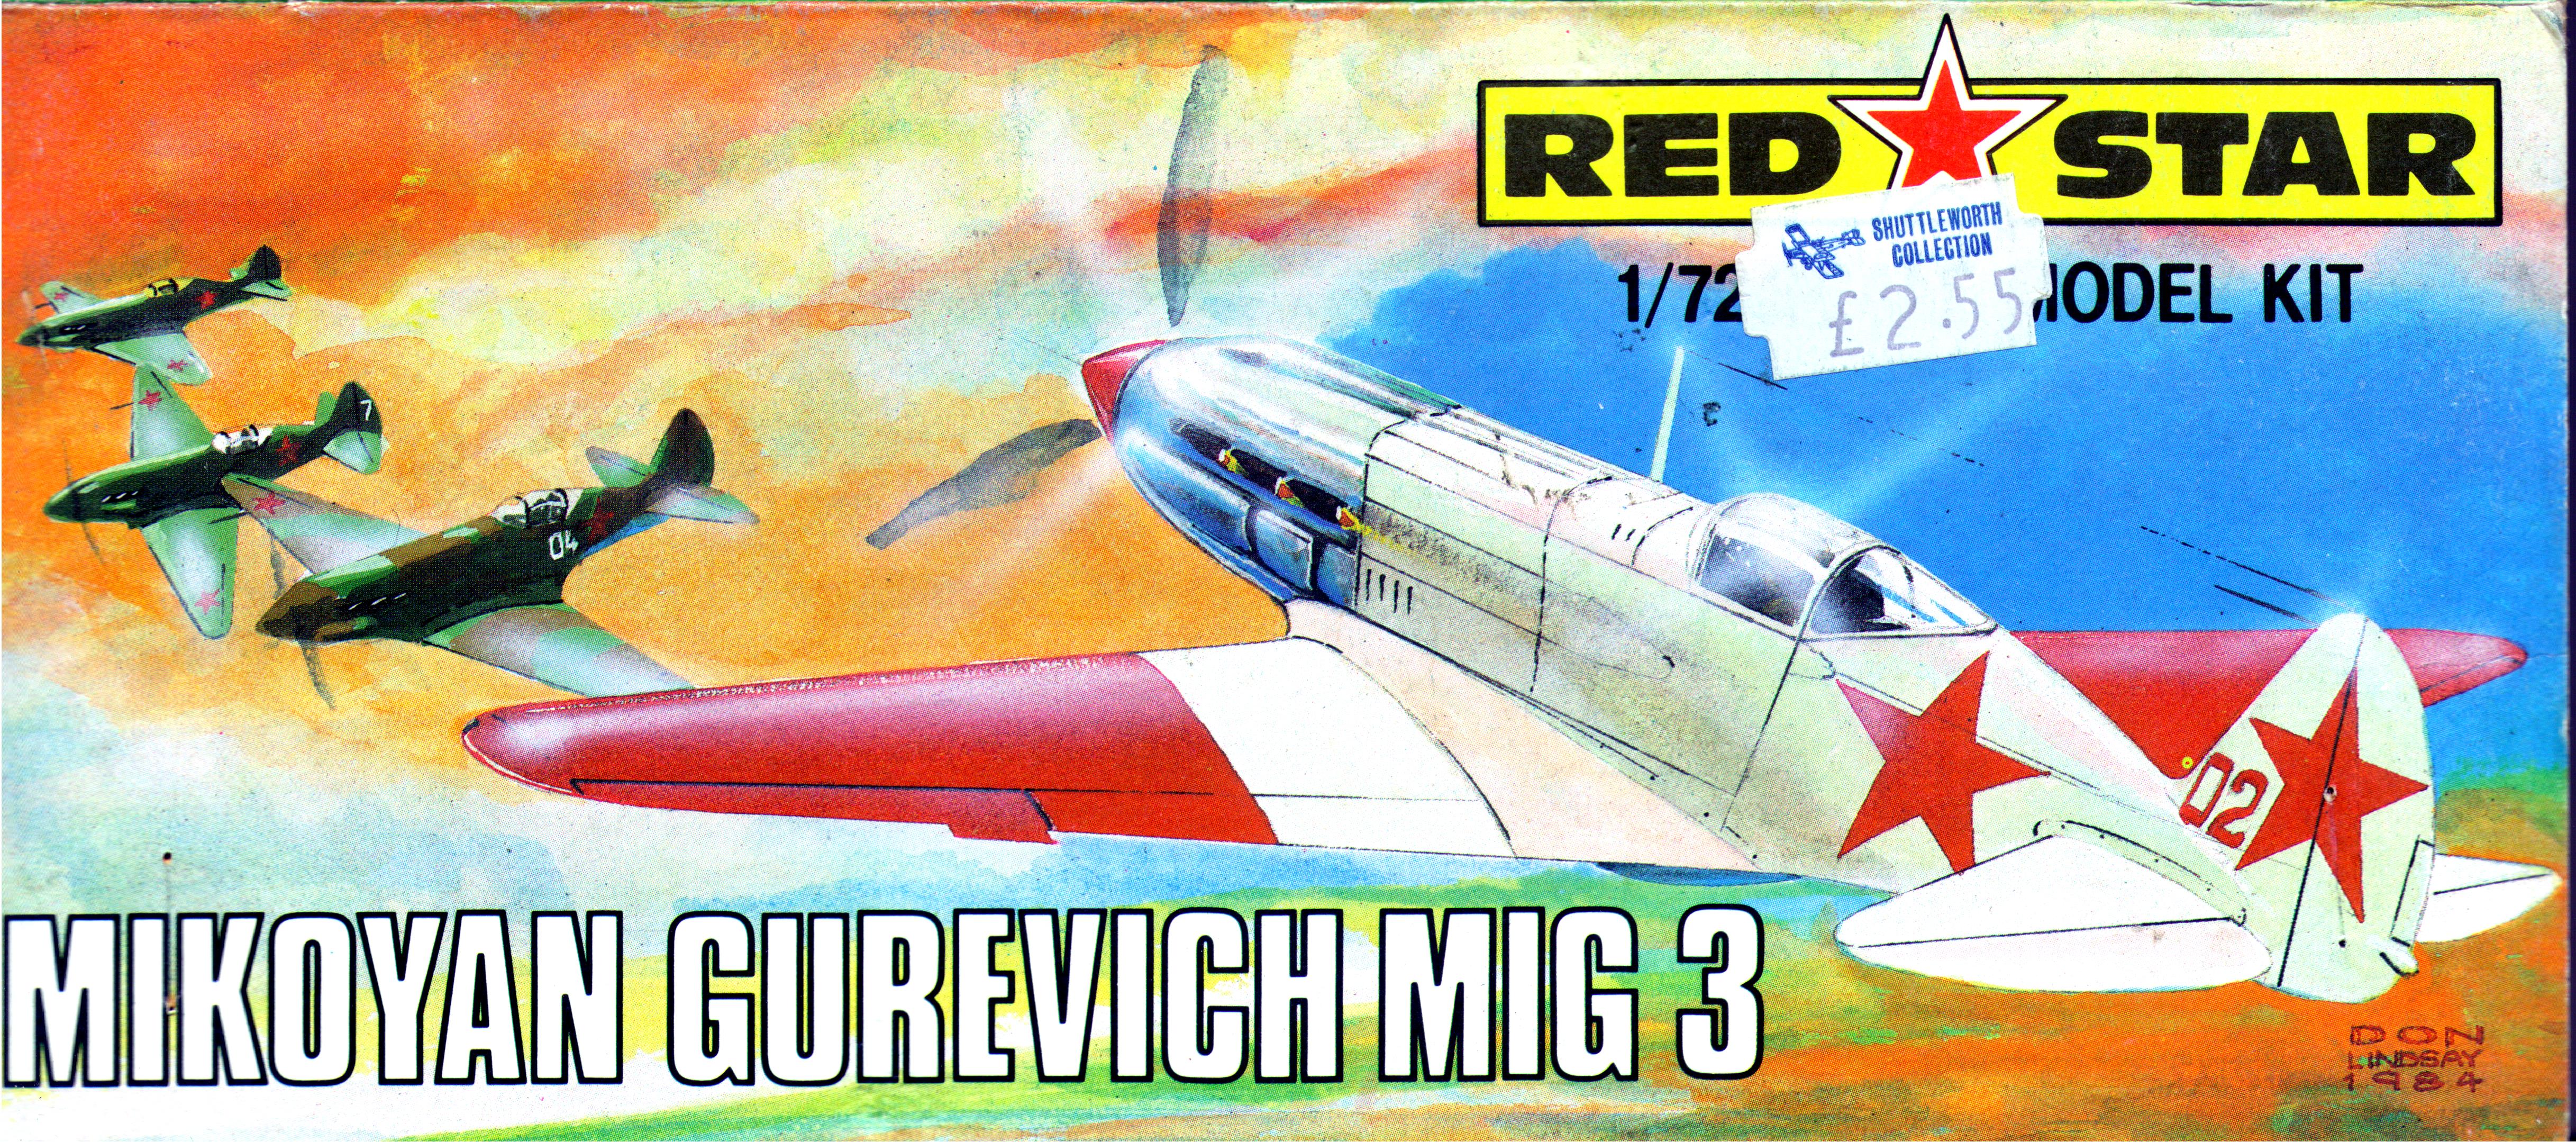 Red Star RS101 Mikoyan and Gurevich MiG-3, Red Star Model Kits Ltd, 1984 Цветной лепесток